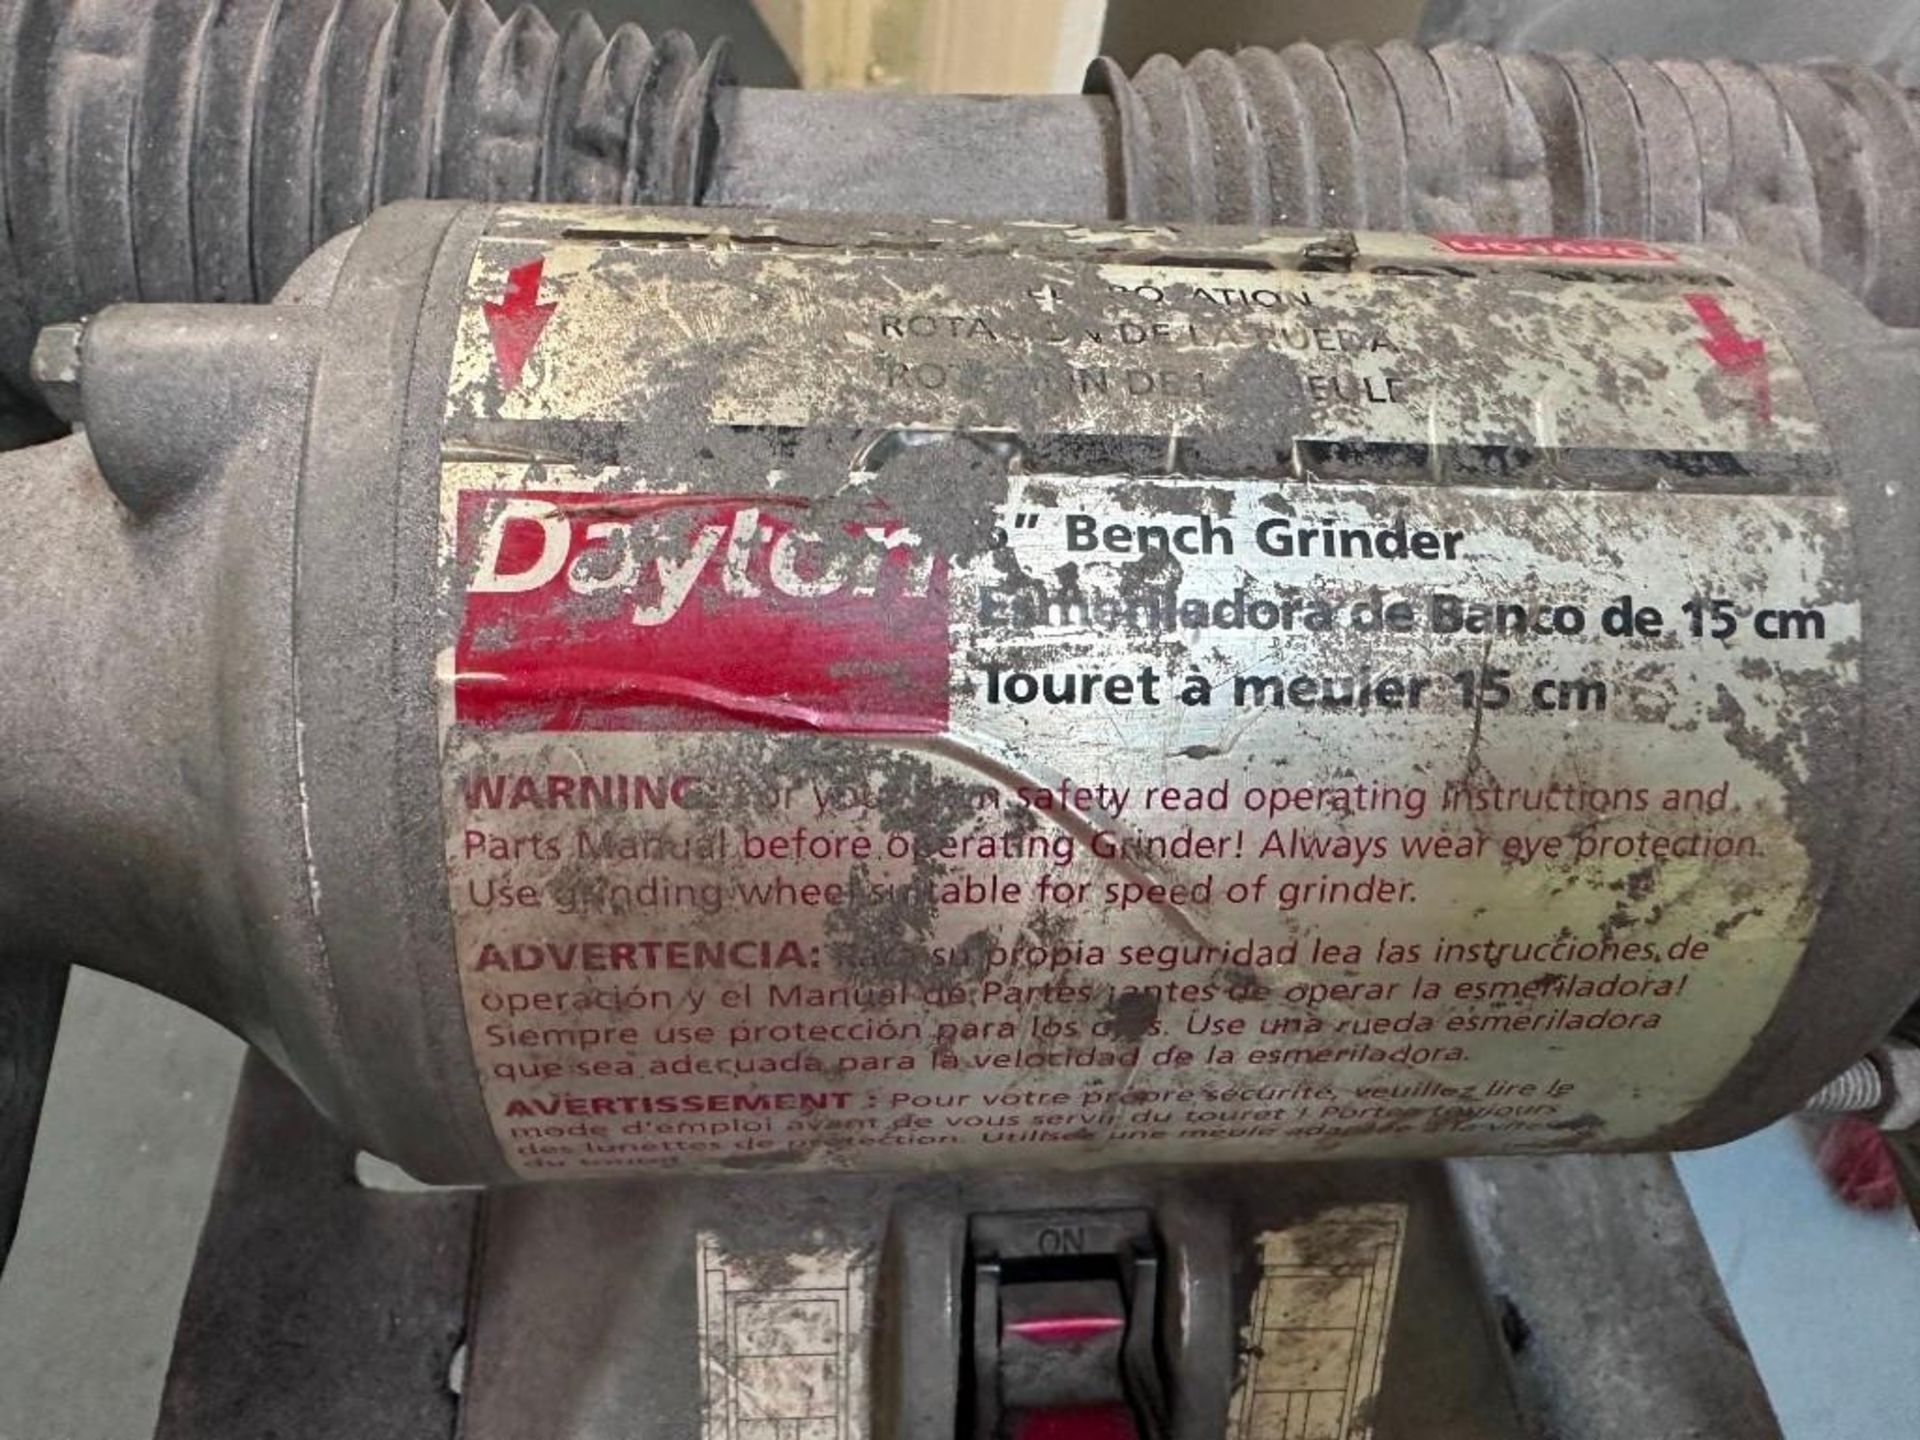 DAYTON 6" BENCH GRINDER WITH STAND - Image 2 of 3